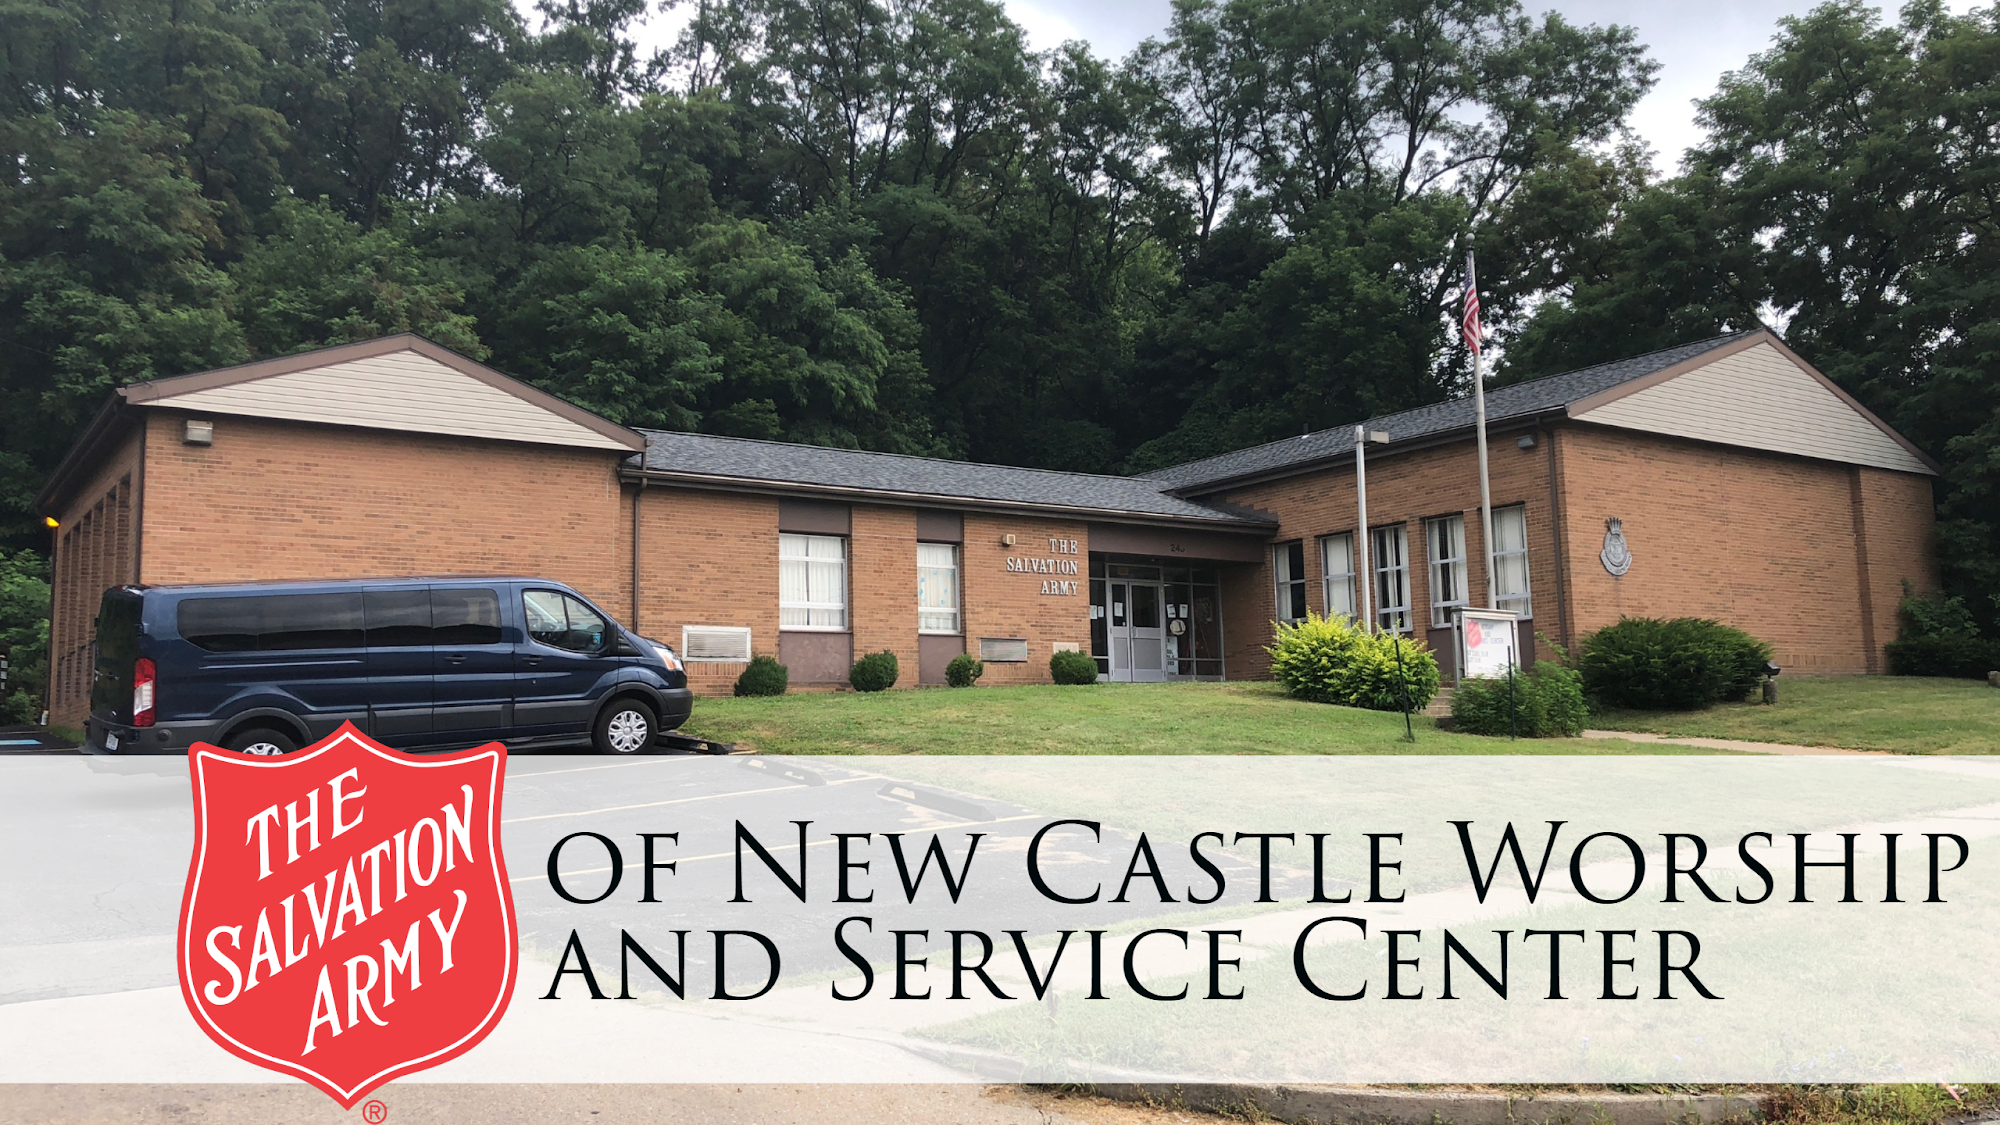 The Salvation Army of New Castle Worship and Service Center